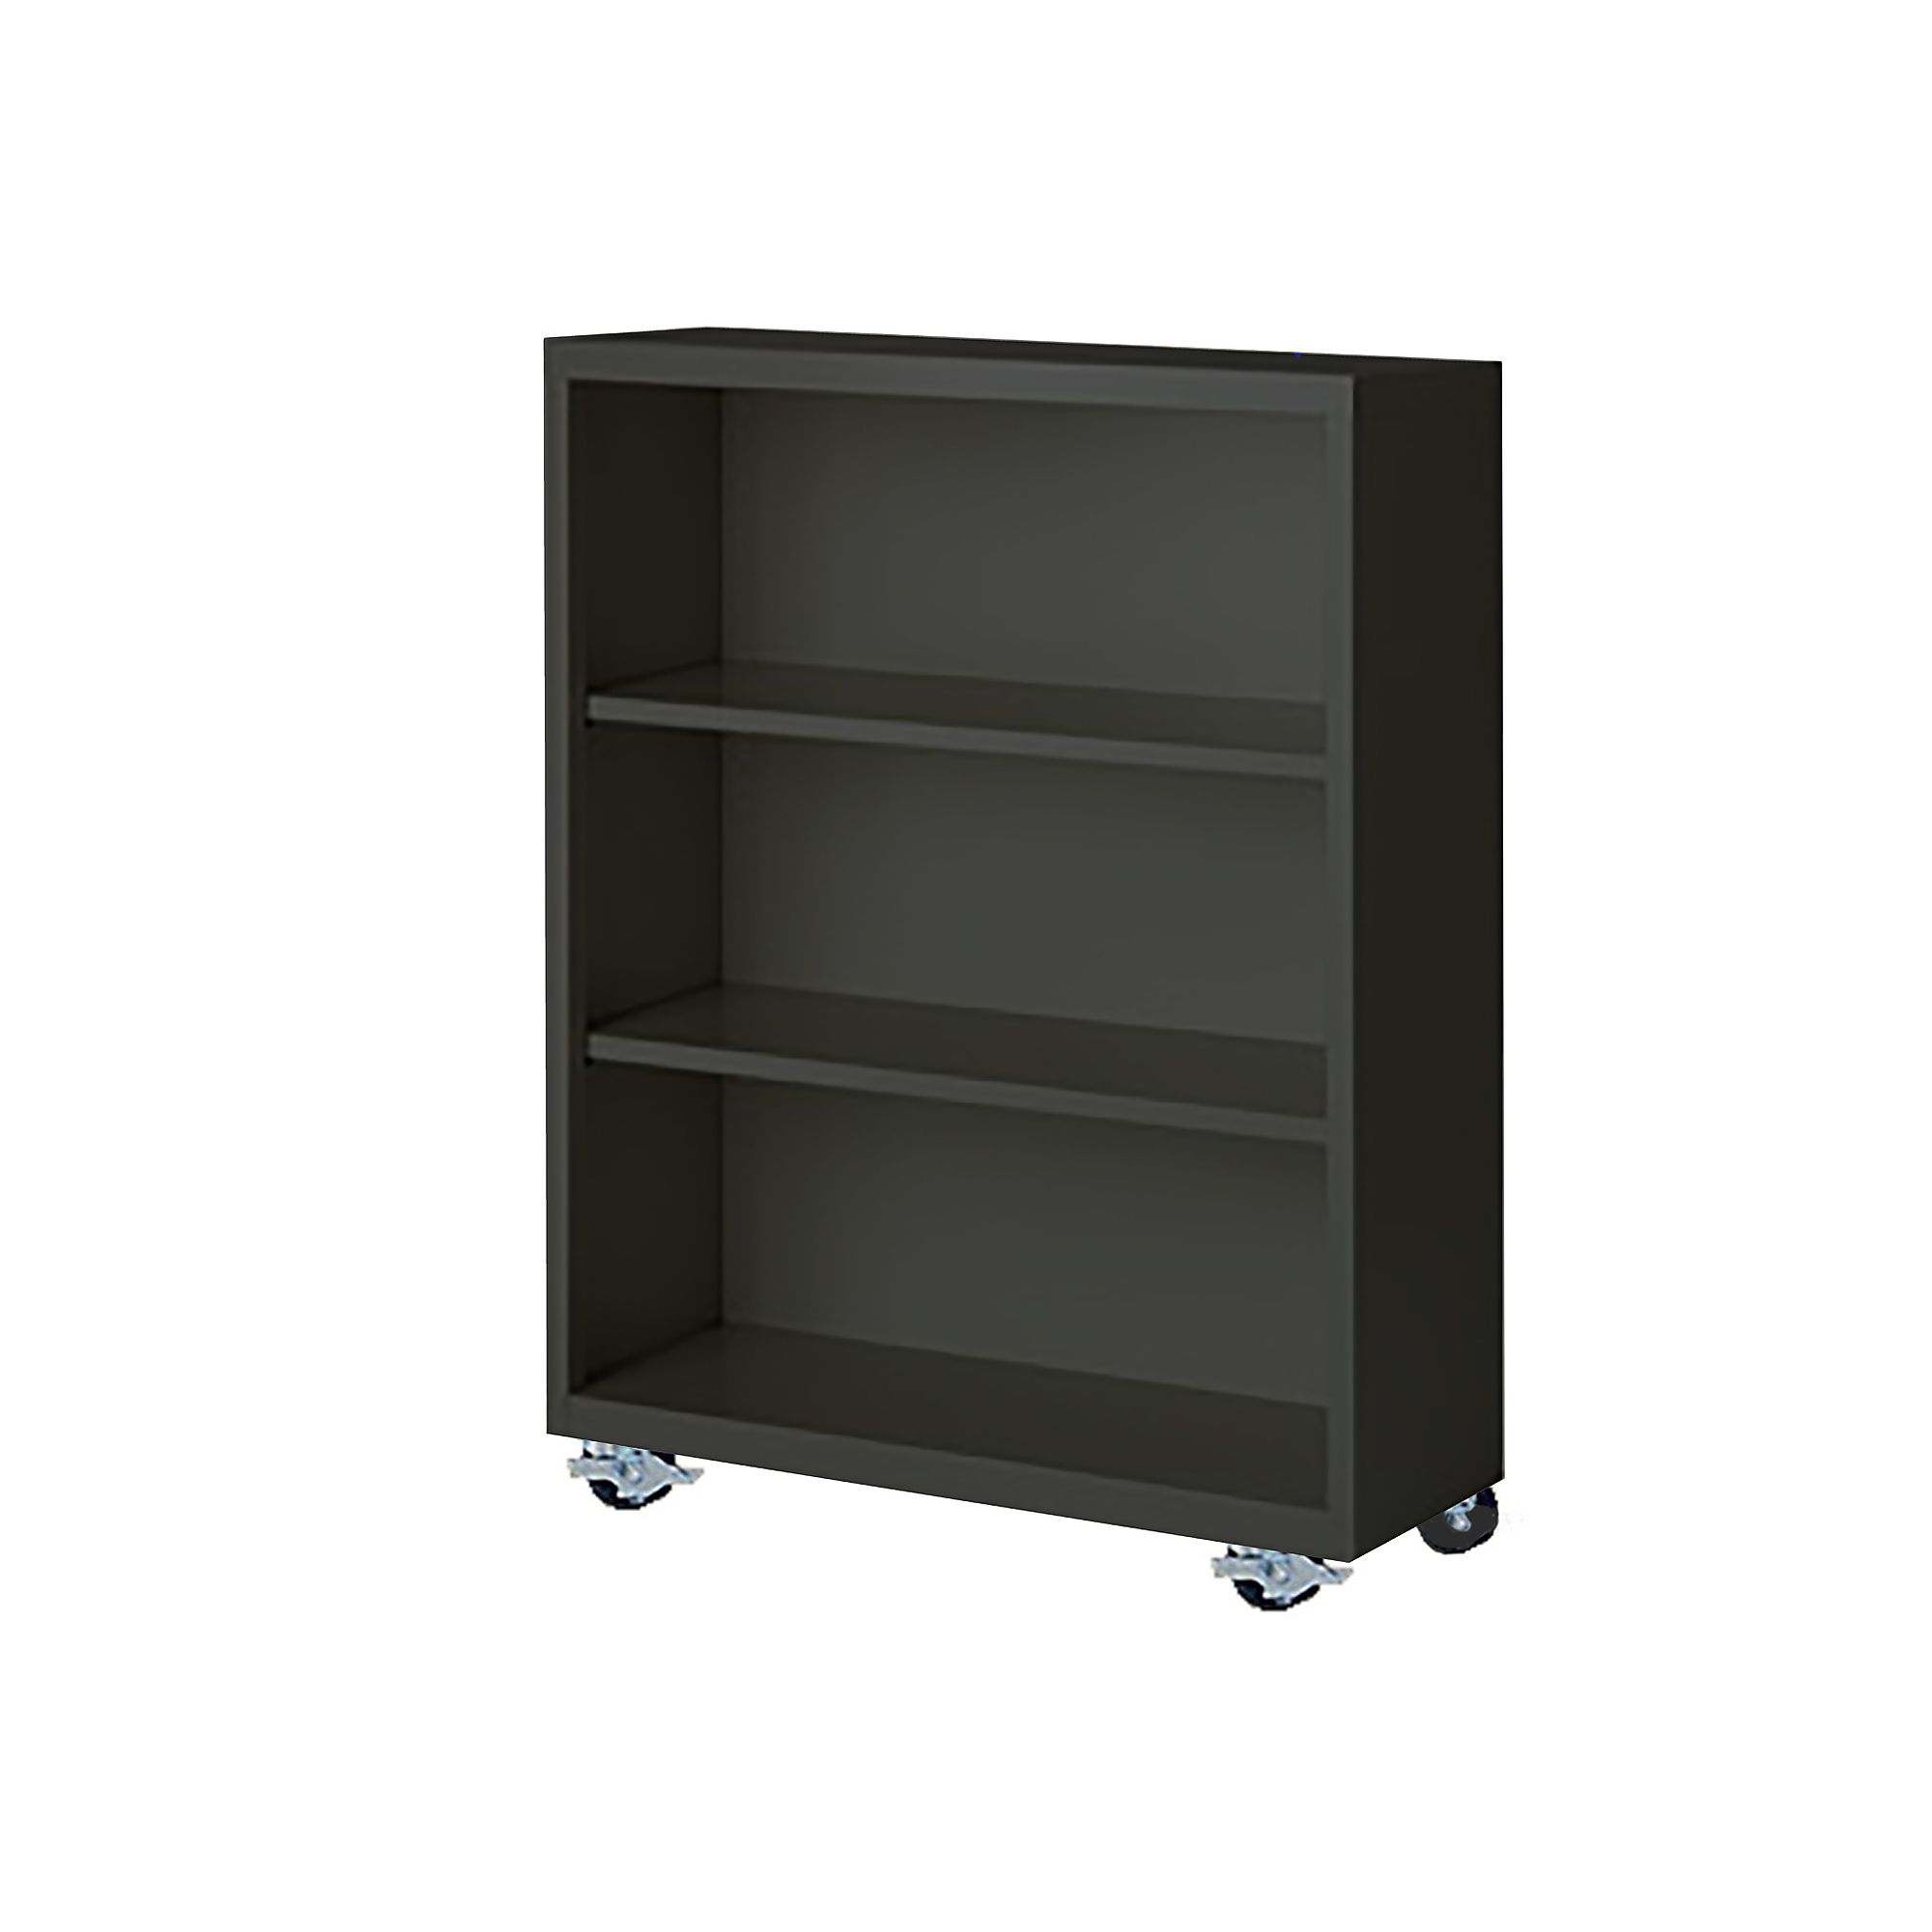 Steel Cabinets USA, 36Inchx18Inchx45Inch Charcoal Mobile Bookcase Assembled, Height 45 in, Shelves (qty.) 3, Material Steel, Model MBCA-364518-C